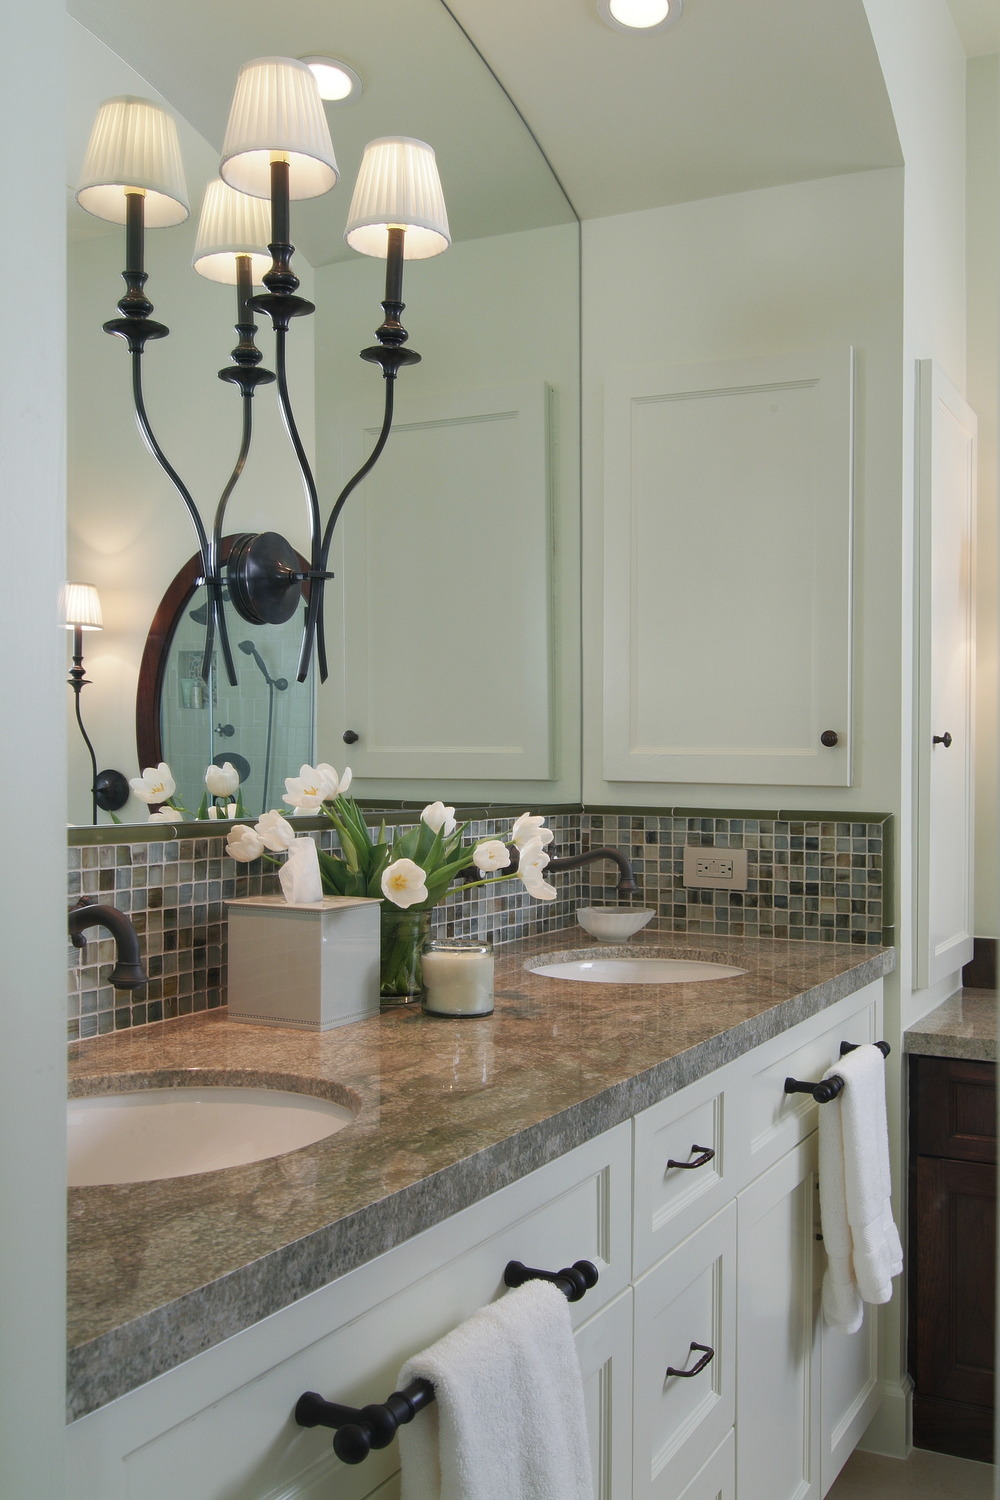 Sink For A Towel Bar, Where To Hang Towel Bars In Bathroom